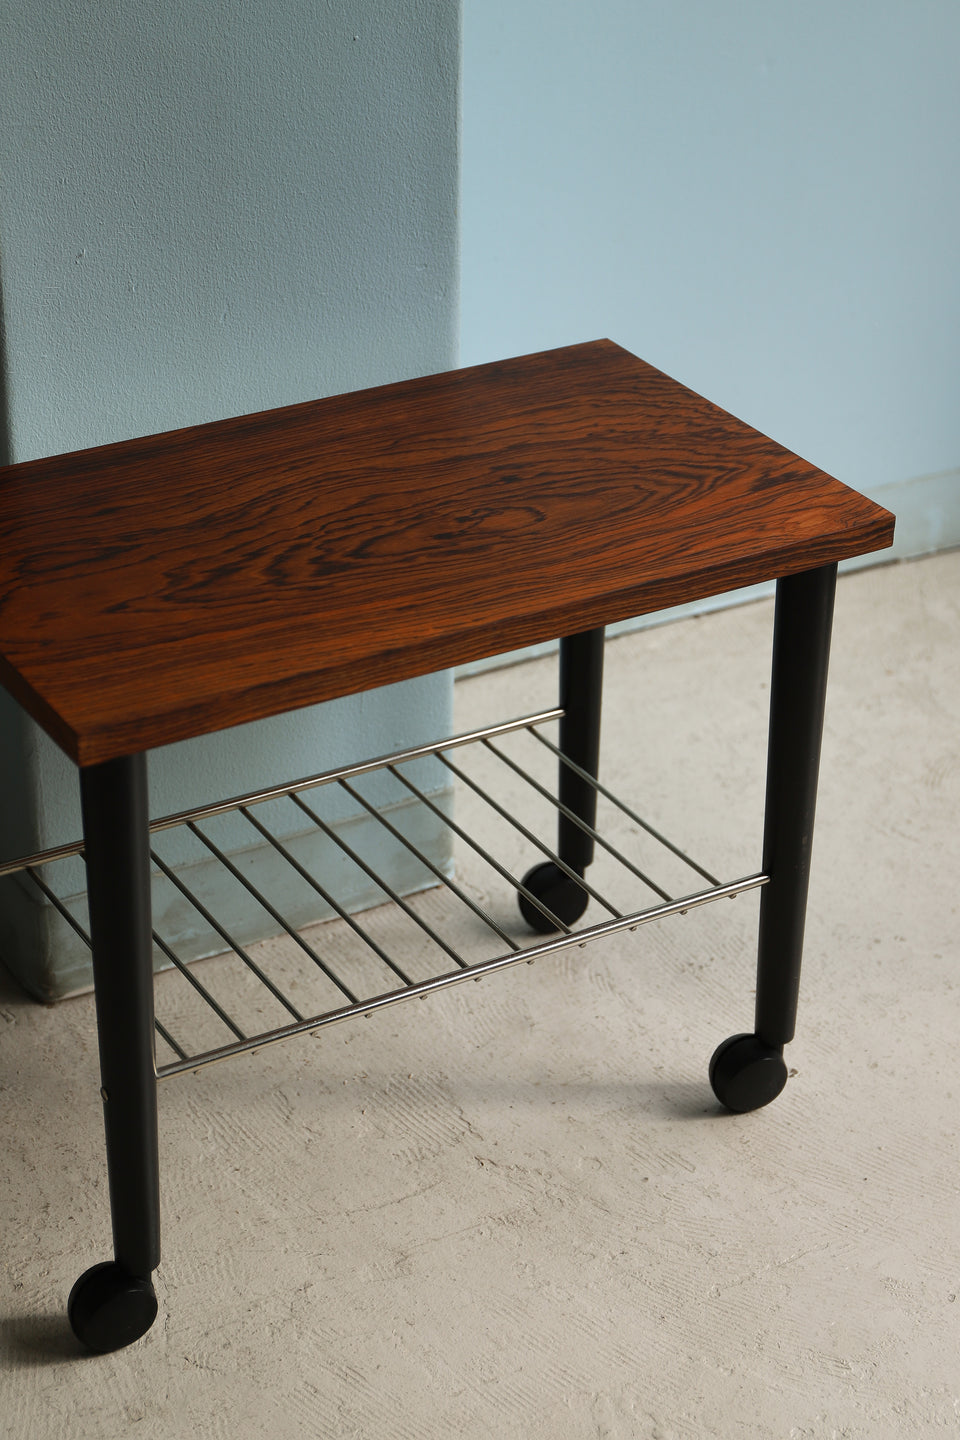 Scandinavian Vintage Rosewood Side Table Trolley/北欧ヴィンテージ サイドテーブル トロリー ローズウッド材 